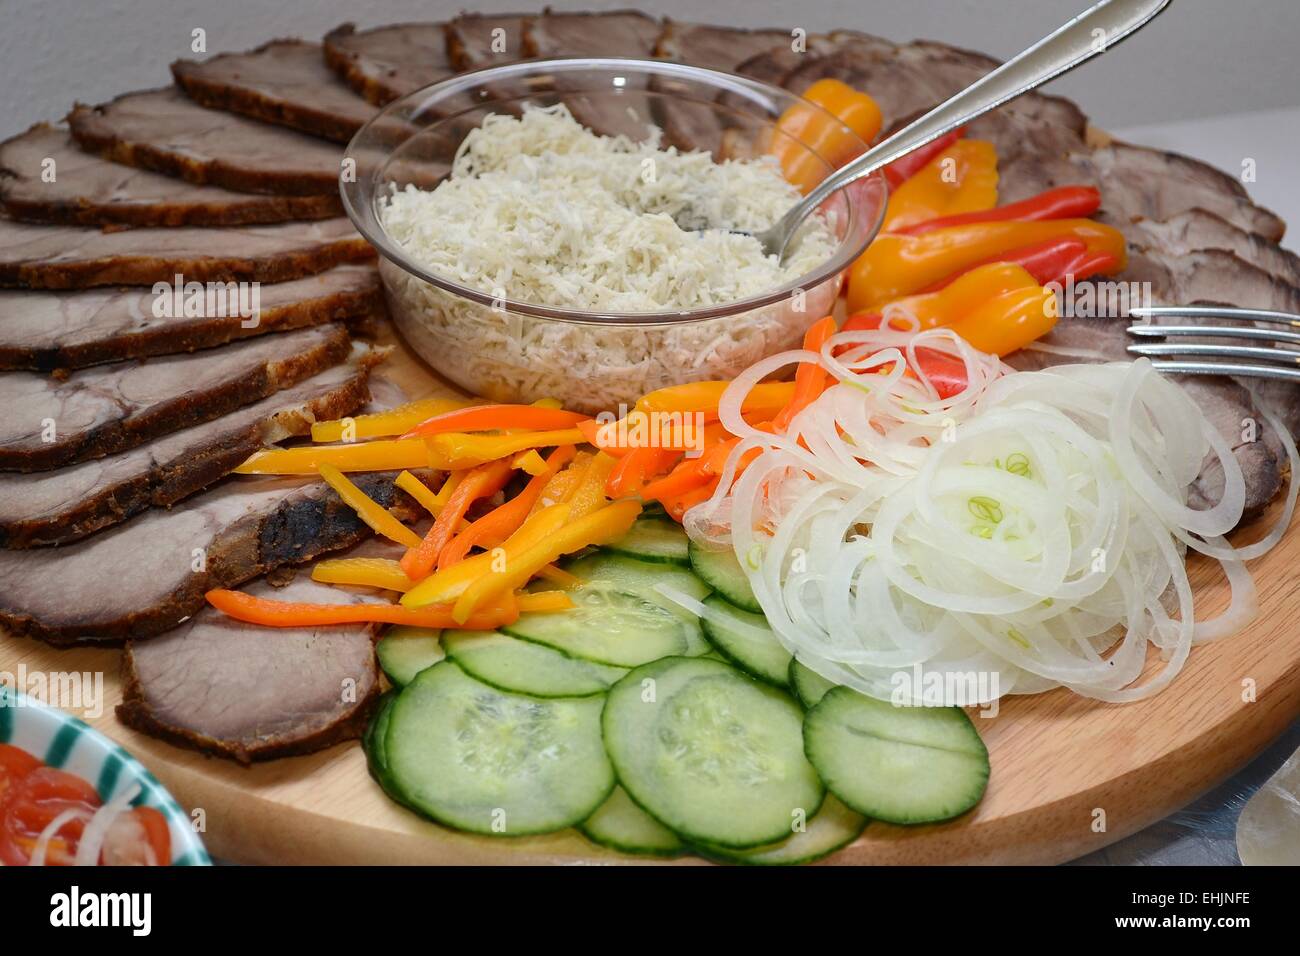 turntable with meat Stock Photo